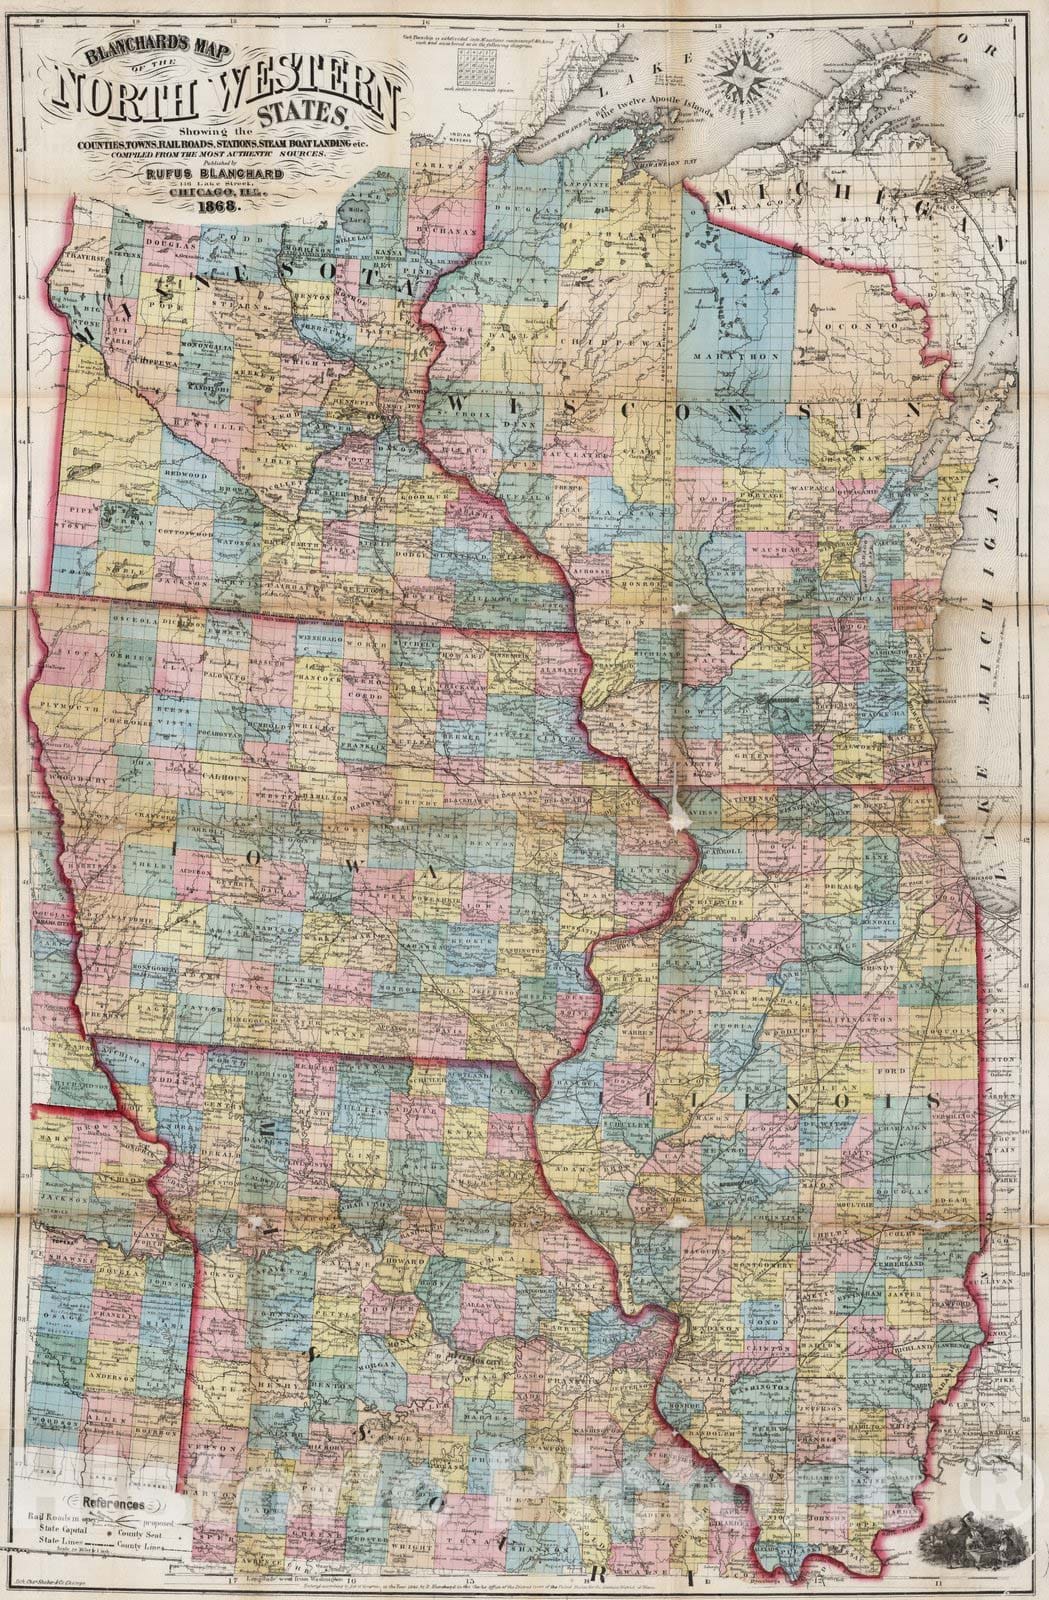 Historic Map : Map of The North Western States, 1868 - Vintage Wall Art